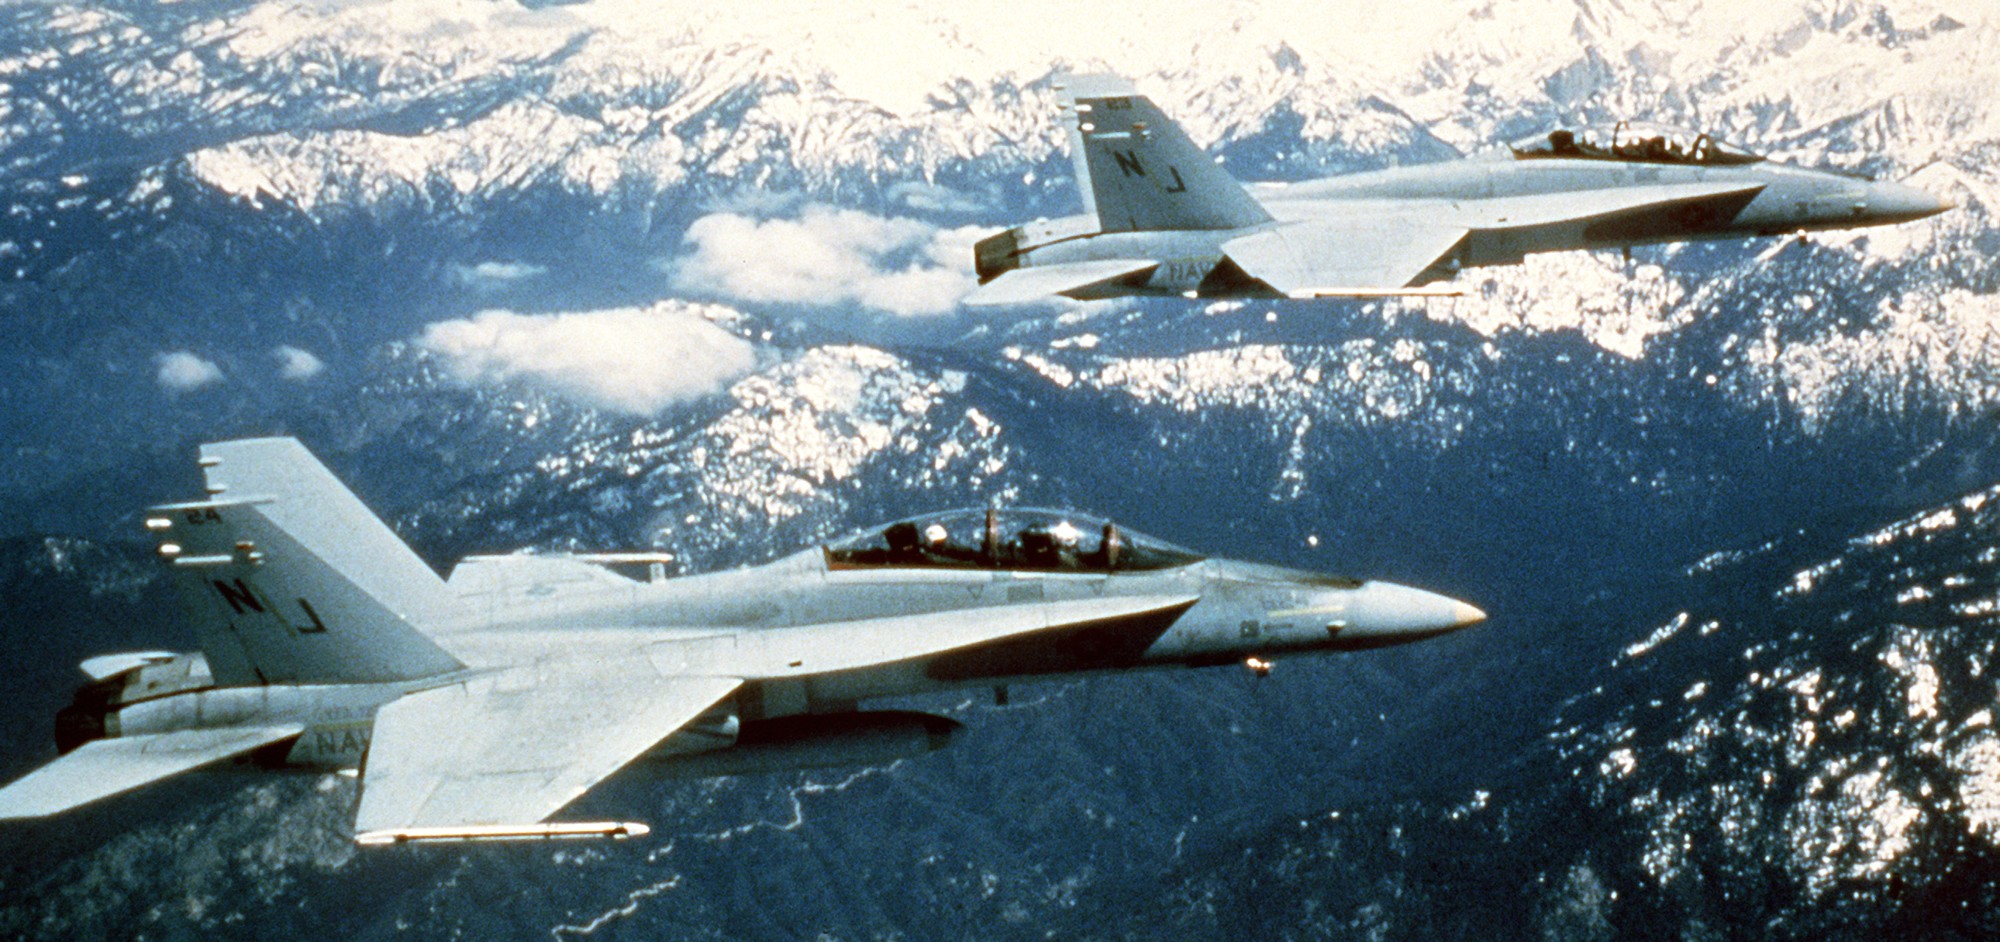 vfa-125 rough raiders strike fighter squadron f/a-18a hornet 1984 45 nas lenoore california fleet replacement